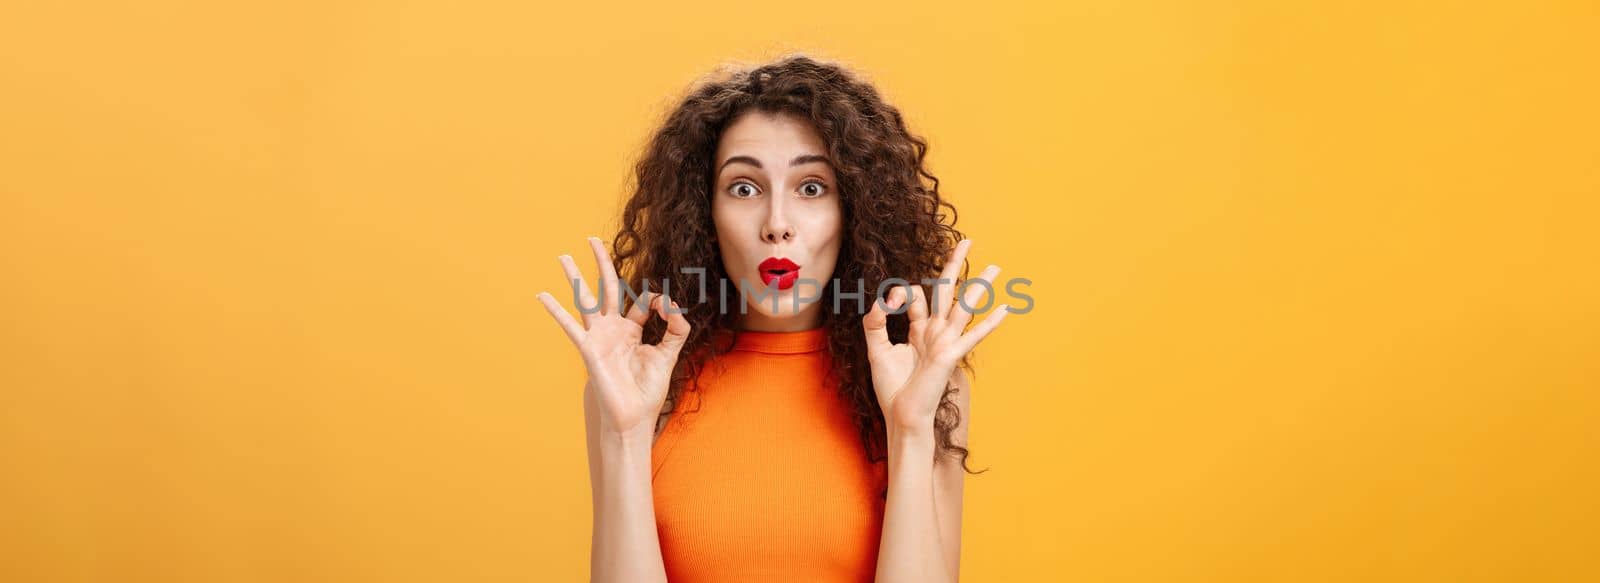 Enthusiastic charming caucasian girl. with curly hairstyle in red lipstick and orange top showing okay gesture being intrigued and delighted folding lips approving and agreeing on awesome adventure.